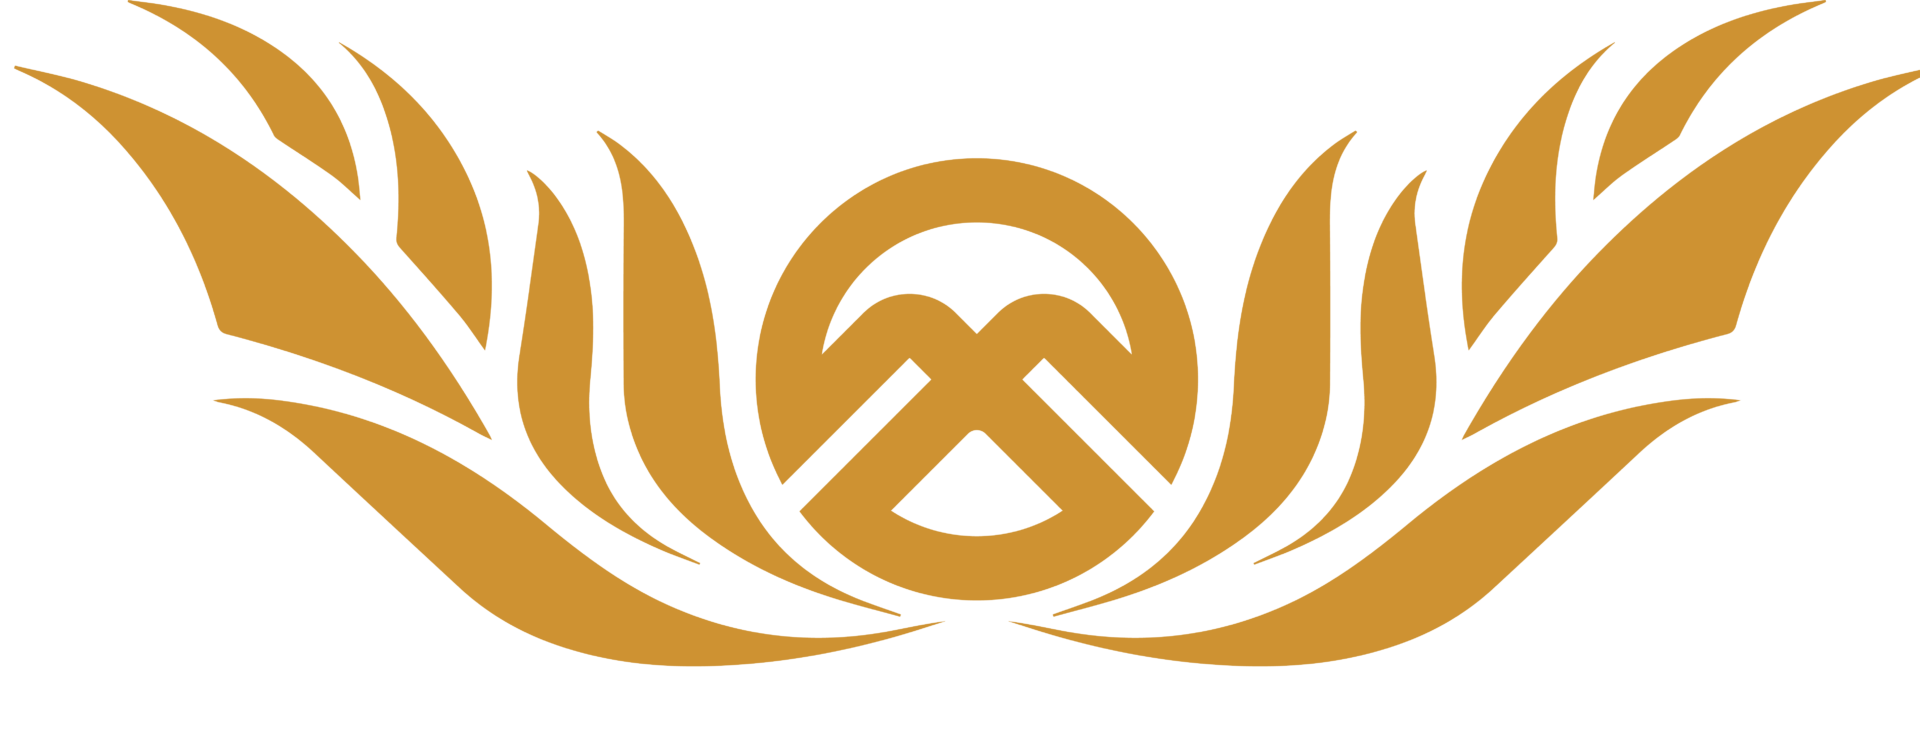 A luxurious golden logo featuring wings, set against a sleek black background, representing an exceptional limo service in Austin.